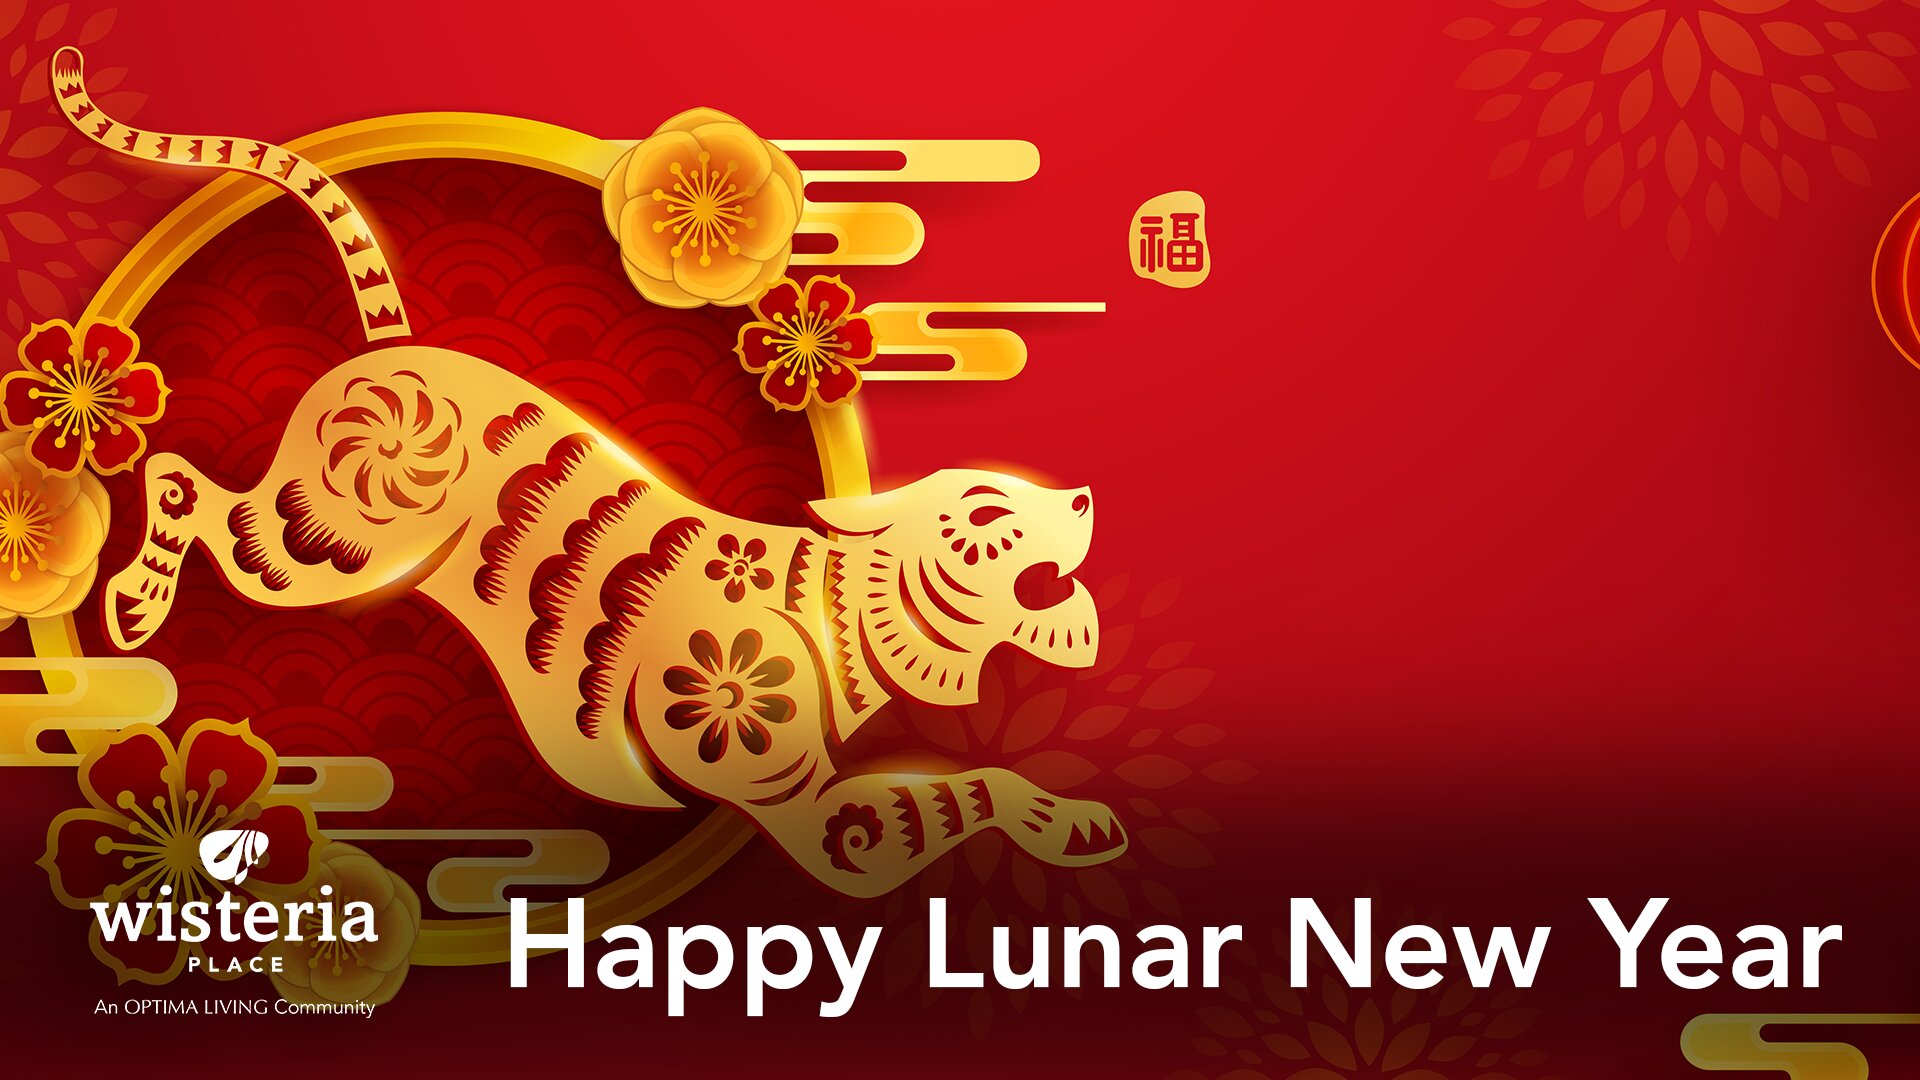 Happy Lunar New Year from our senior living community's